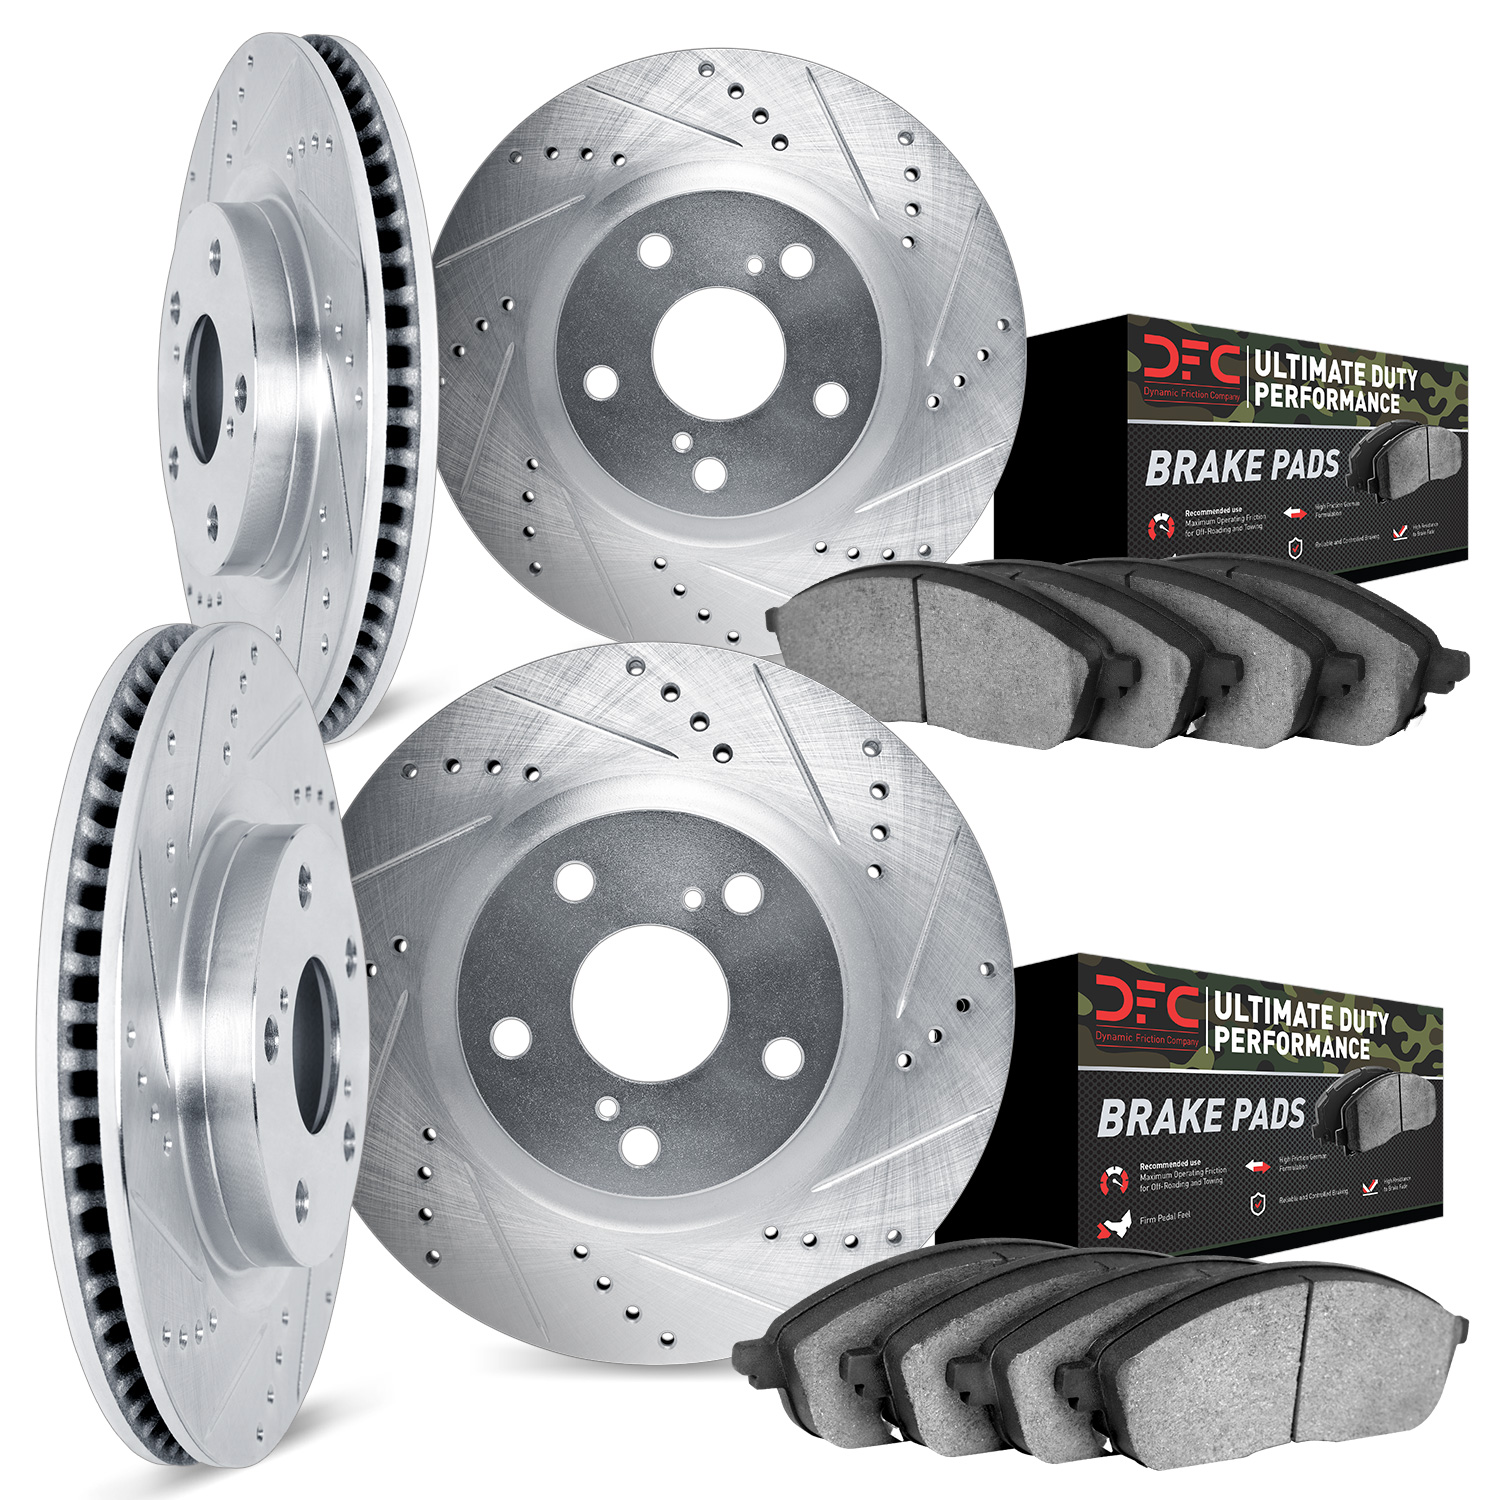 7404-48001 Drilled/Slotted Brake Rotors with Ultimate-Duty Brake Pads Kit [Silver], 1997-2005 GM, Position: Front and Rear